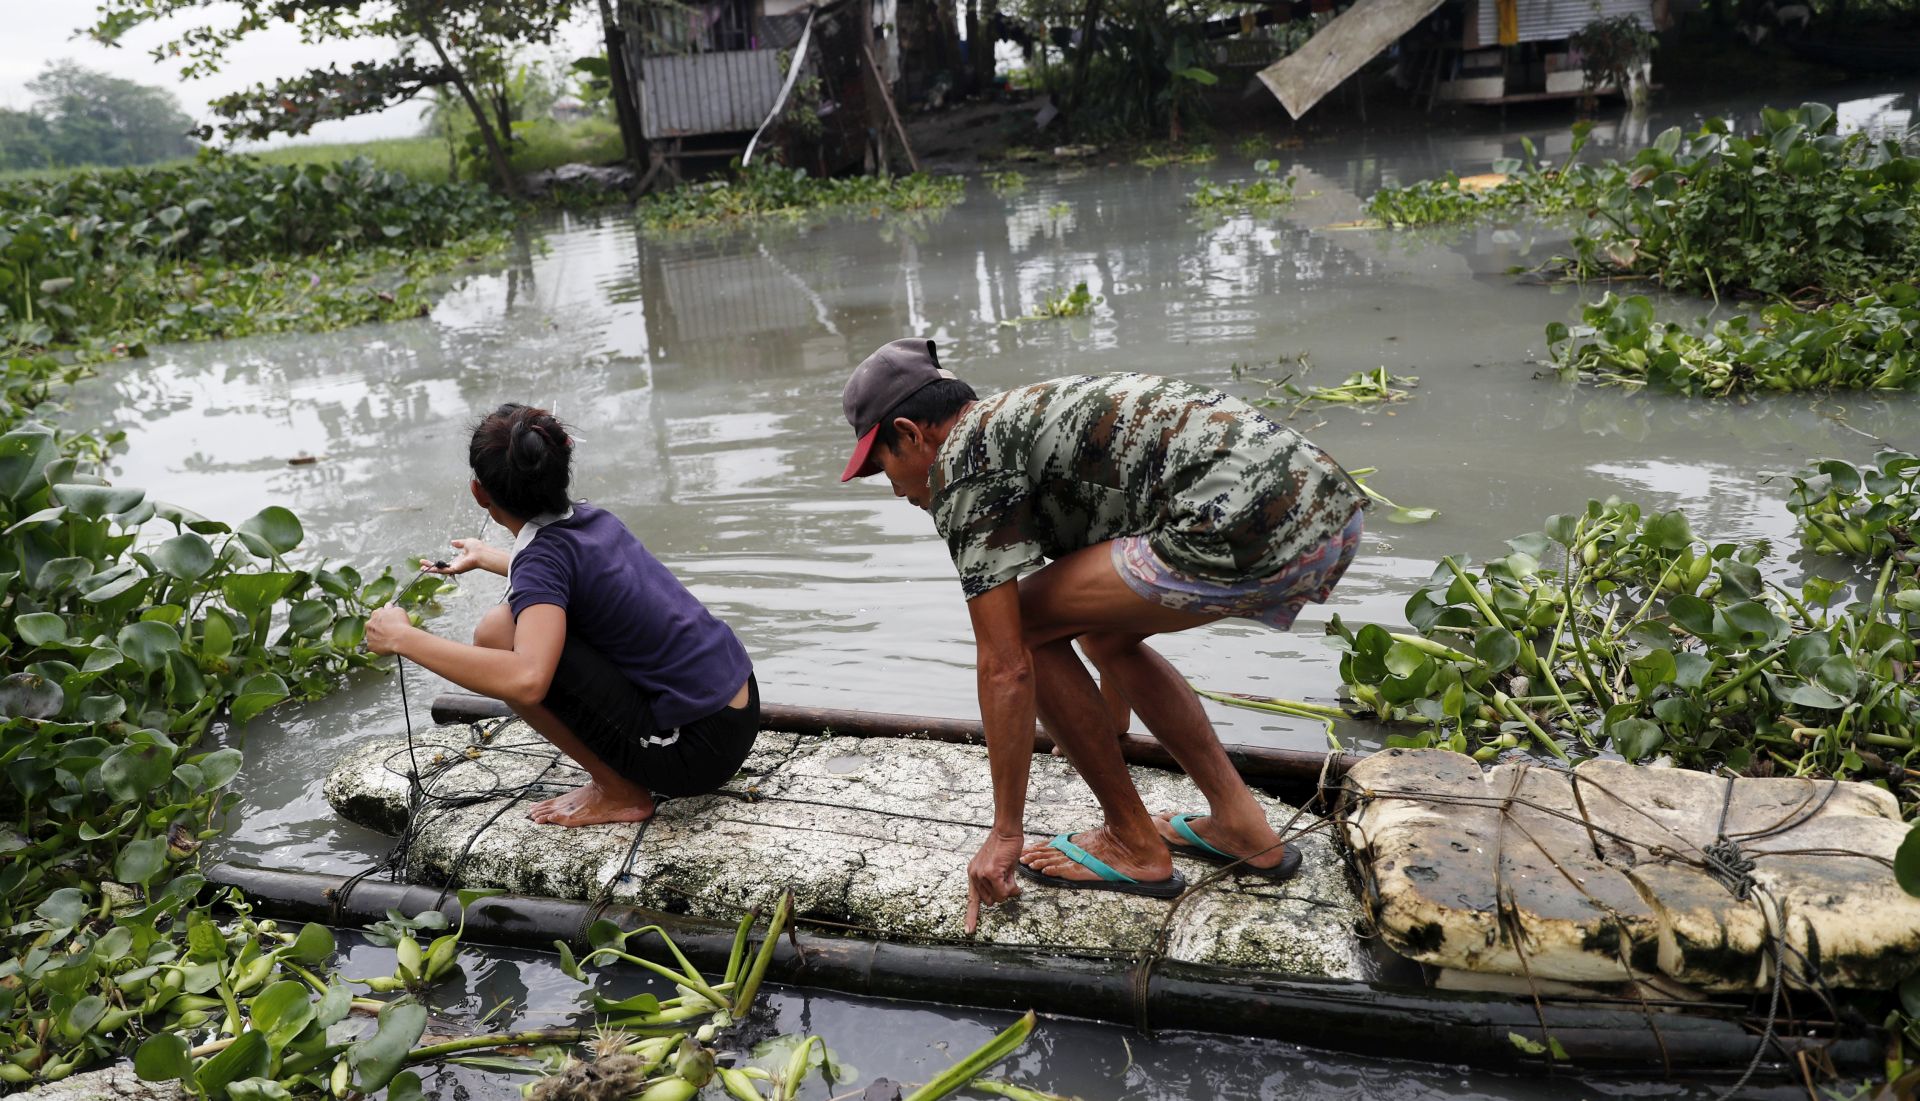 epa06401049 Filipinos on makeshift raft wade on floodwater in Taguig city, south of Manila, Philippines, 21 December 2017. State weather bureau, the Philippine Atmospheric Geophysical and Astronomical Services Administration (PAGASA) raised storm signals over Mindanao provinces as tropical storm Tembin expected to landfall. The National Disaster Risk Reduction Management Council (NDRRMC) warned travelers for Chistmas holidays to monitor advisories on the possible cancellation of trips, to avoid the influx of passengers.  EPA/FRANCIS R. MALASIG